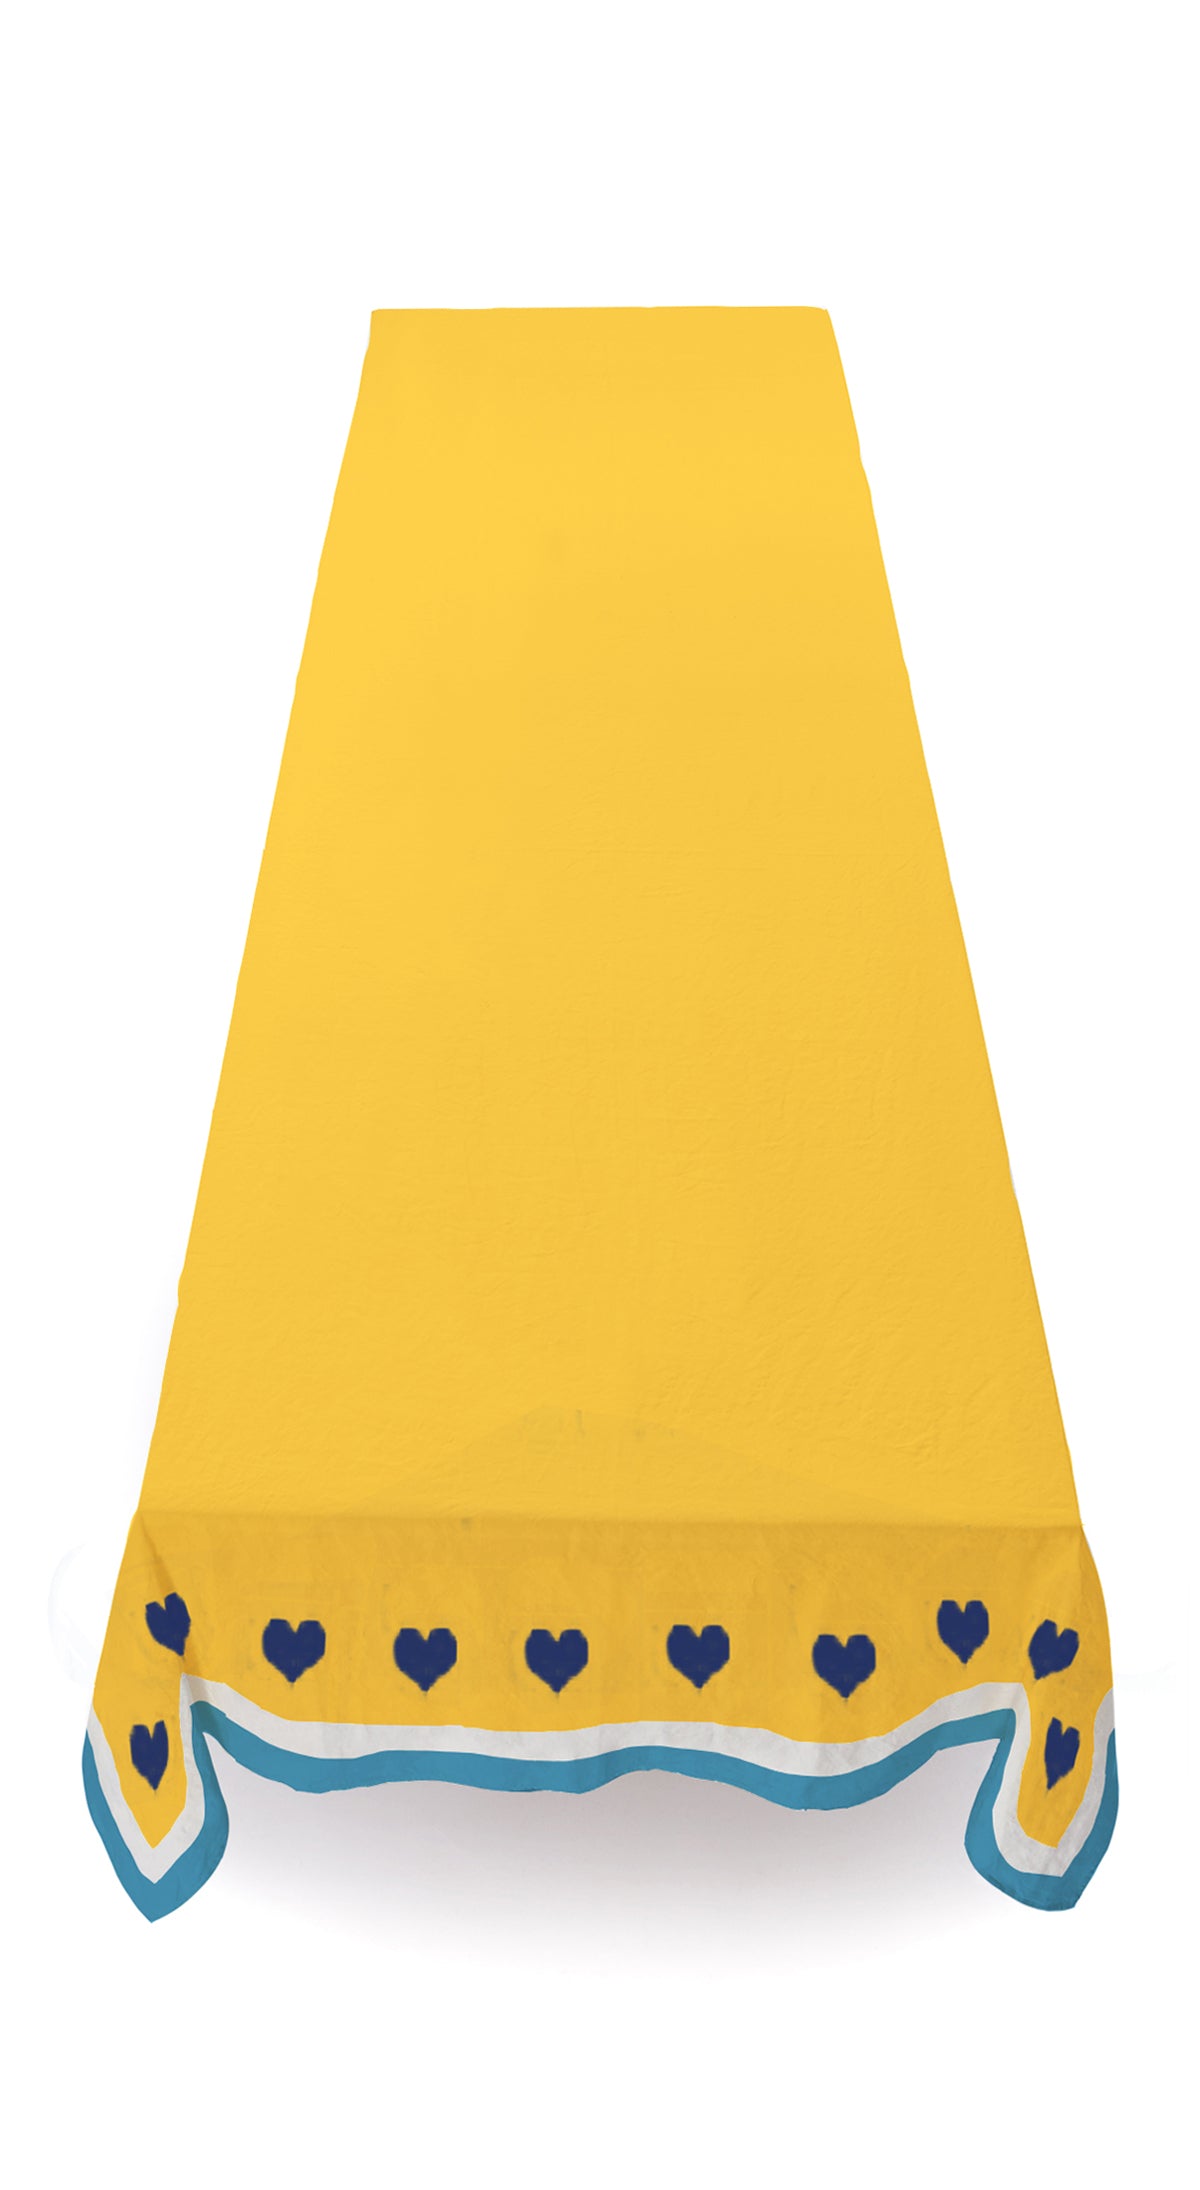 Summerill & Bishop x Lisou Heart Linen Tablecloth in Light Blue and Yellow